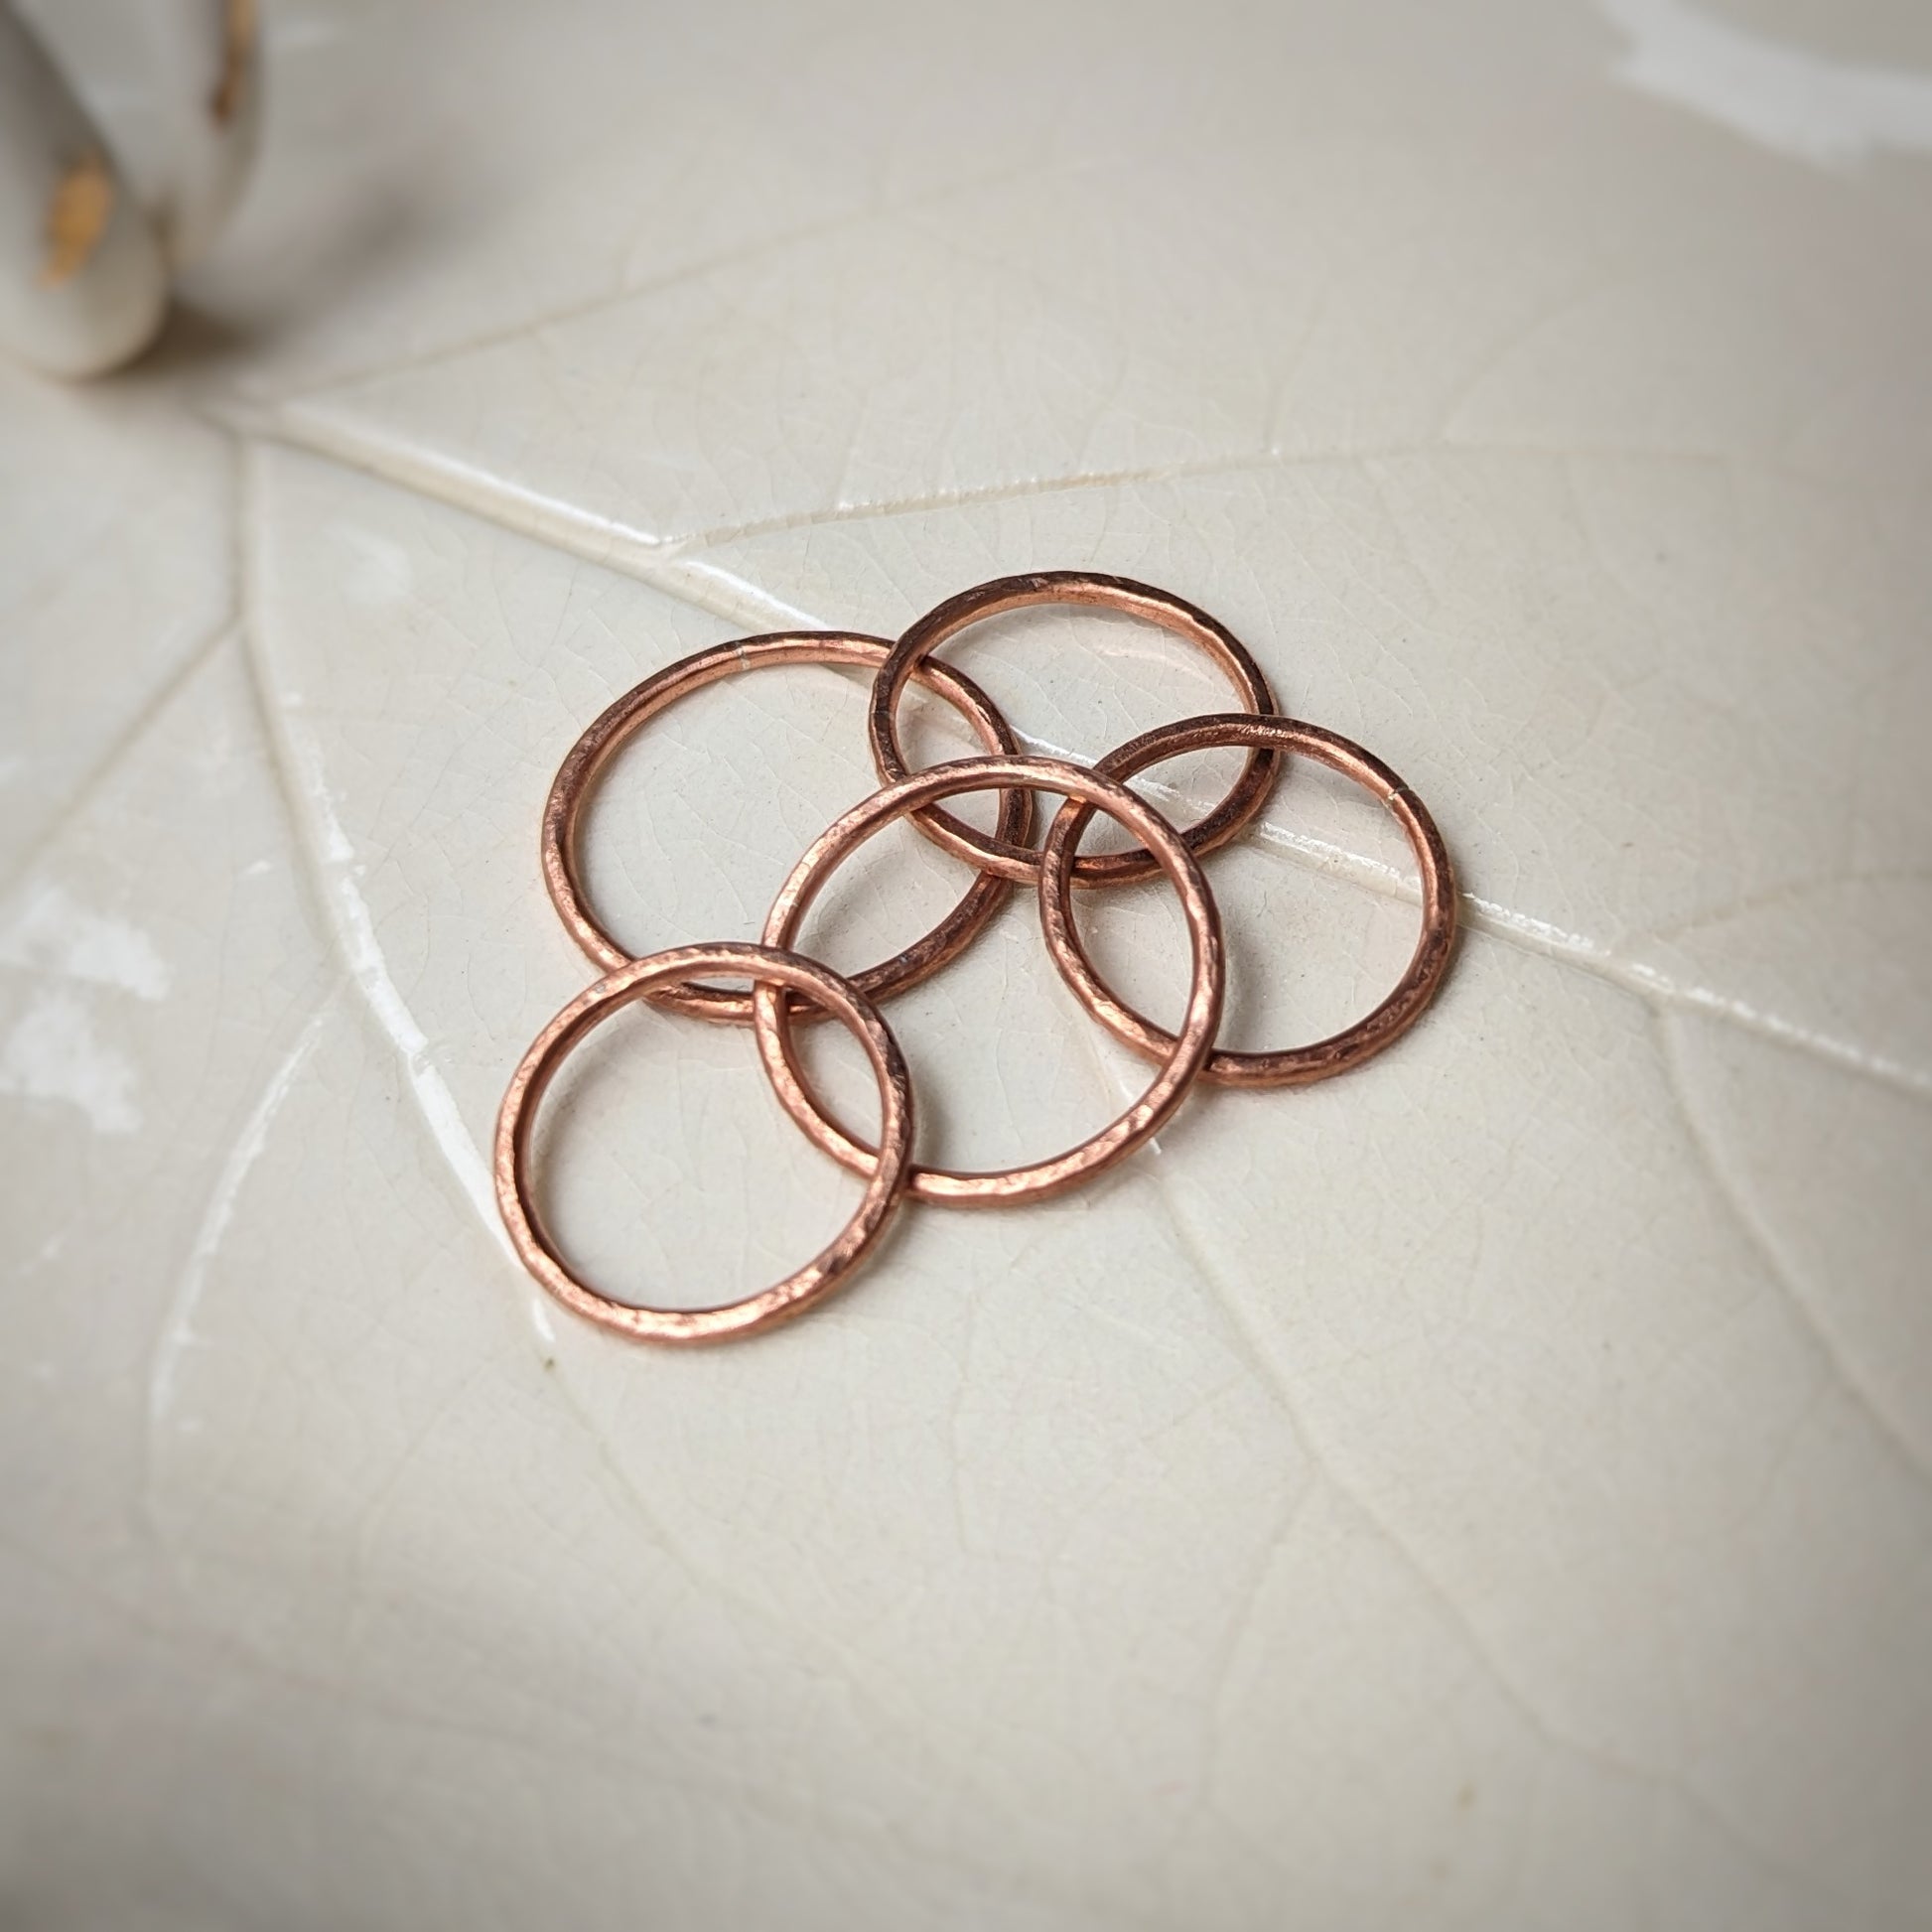 A collection of hammer texture pink copper rings sit scattered on a leaf imprint tray.